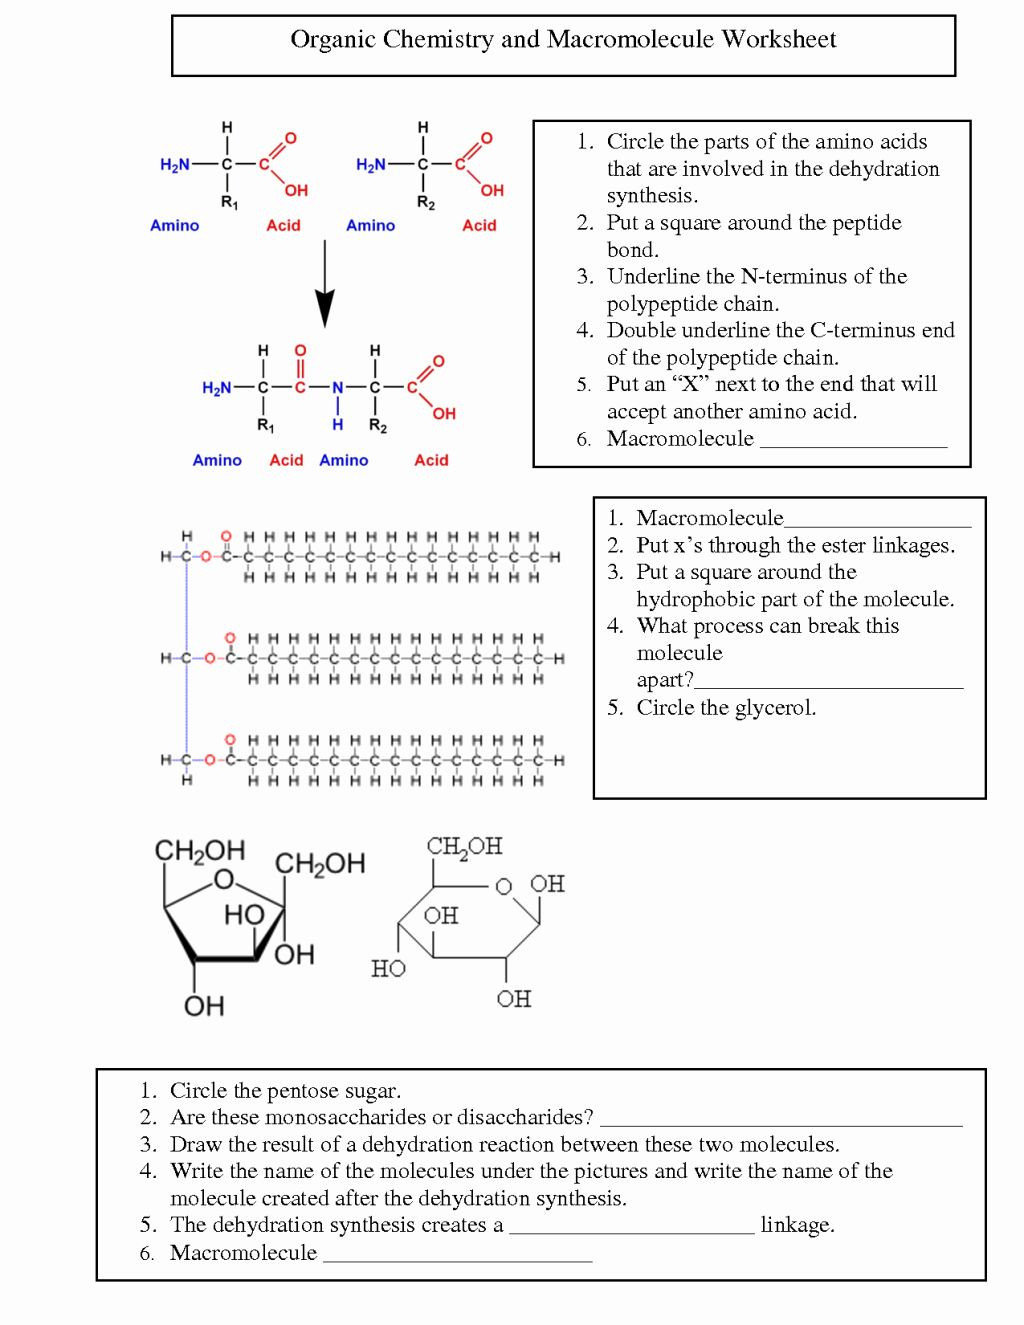 Organic Chemistry Worksheet with Answers 50 organic Chemistry Worksheet with Answers In 2020